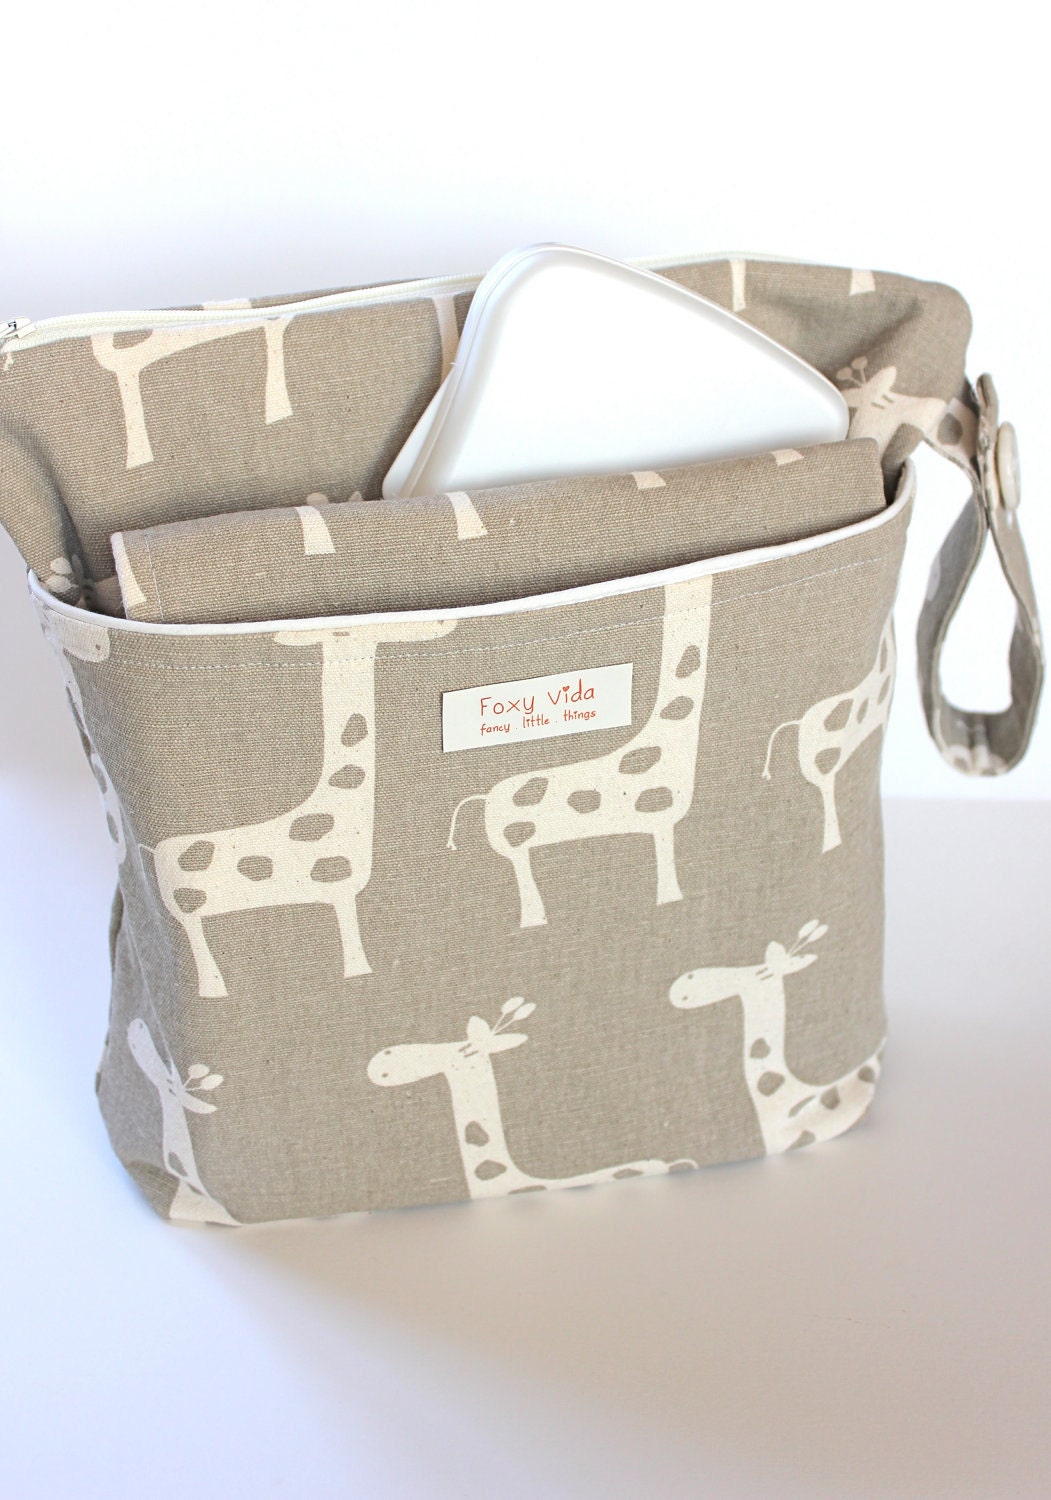 LIMITED EDITION Baby Diaper Wet Bag SET With Dry Pocket and Changing Pad Giraffes